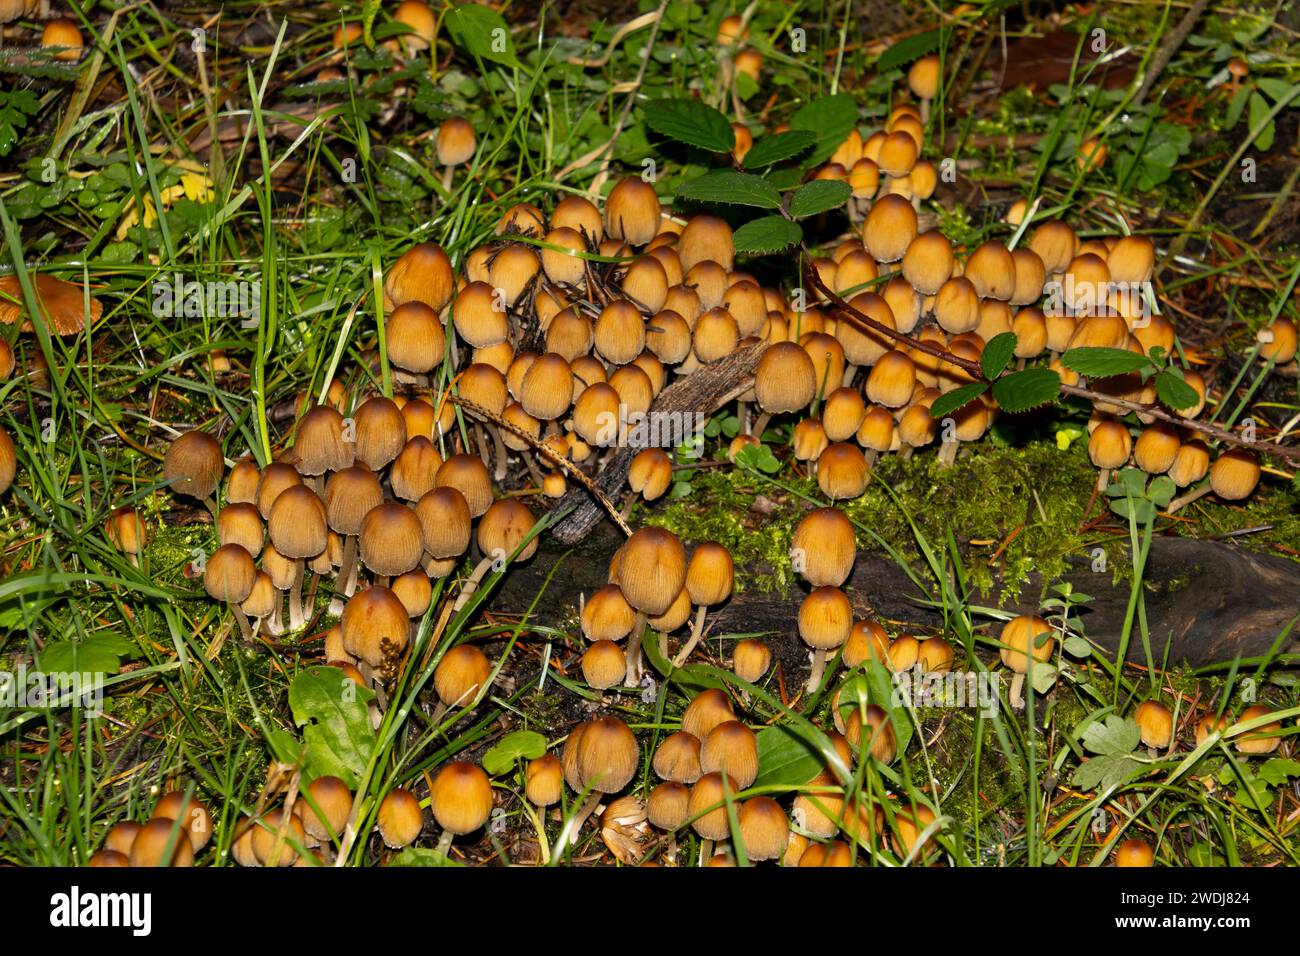 Cluster of Mushrooms growing on dead wood in the forest, Coprinellus micaceus Stock Photo